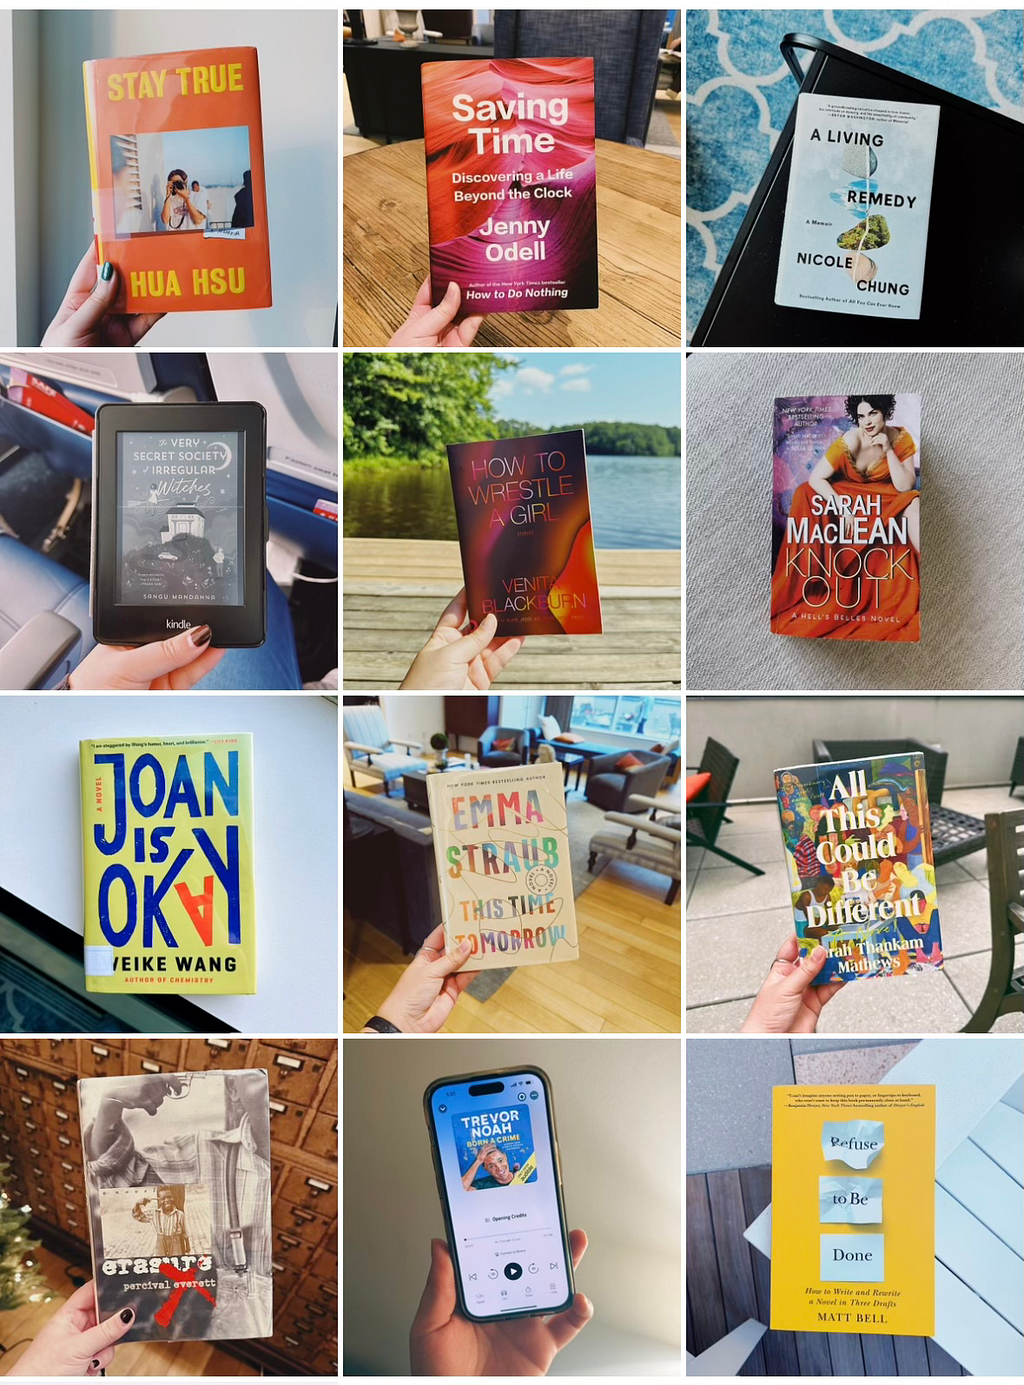 A grid of 12 favorite books, including “Joan Is Okay” and “This Time Tomorrow”